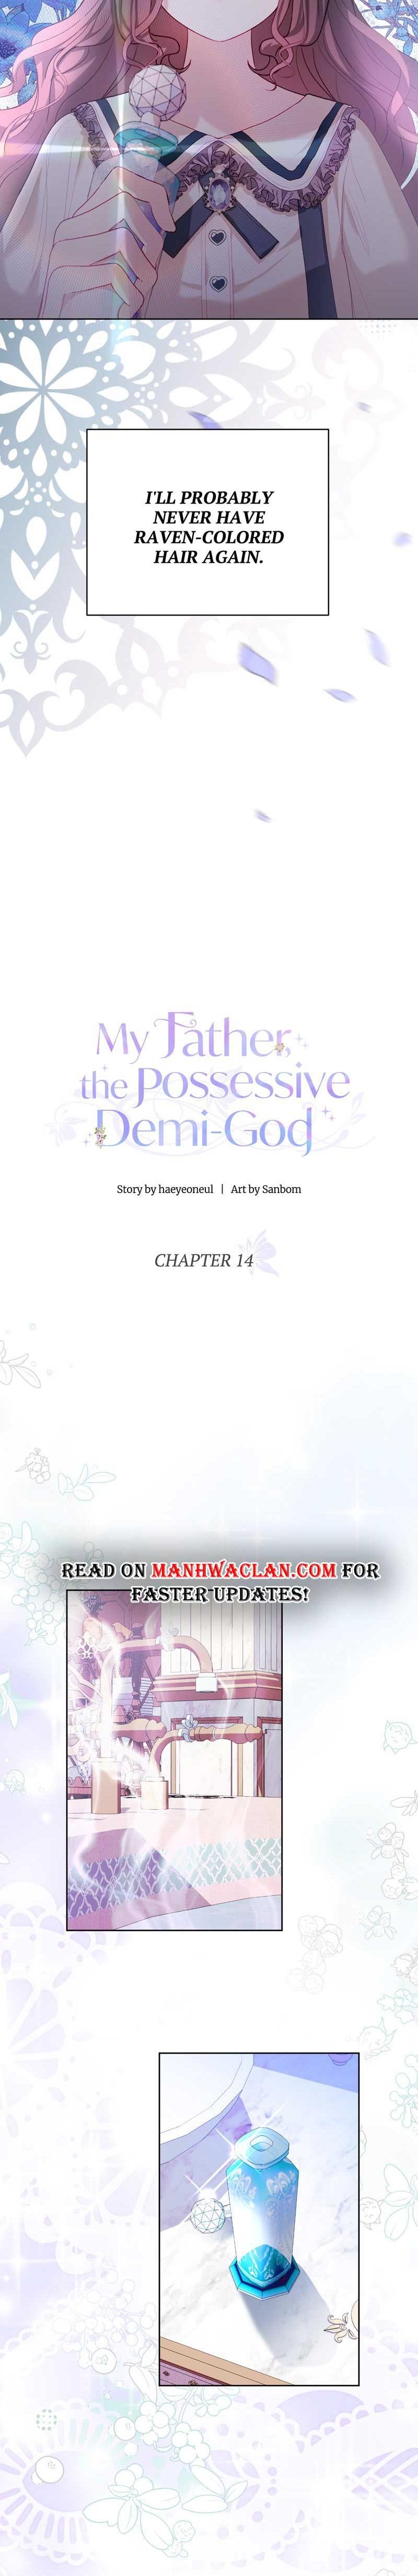 My Father, the Possessive Demi-God Chapter 14 - Page 8